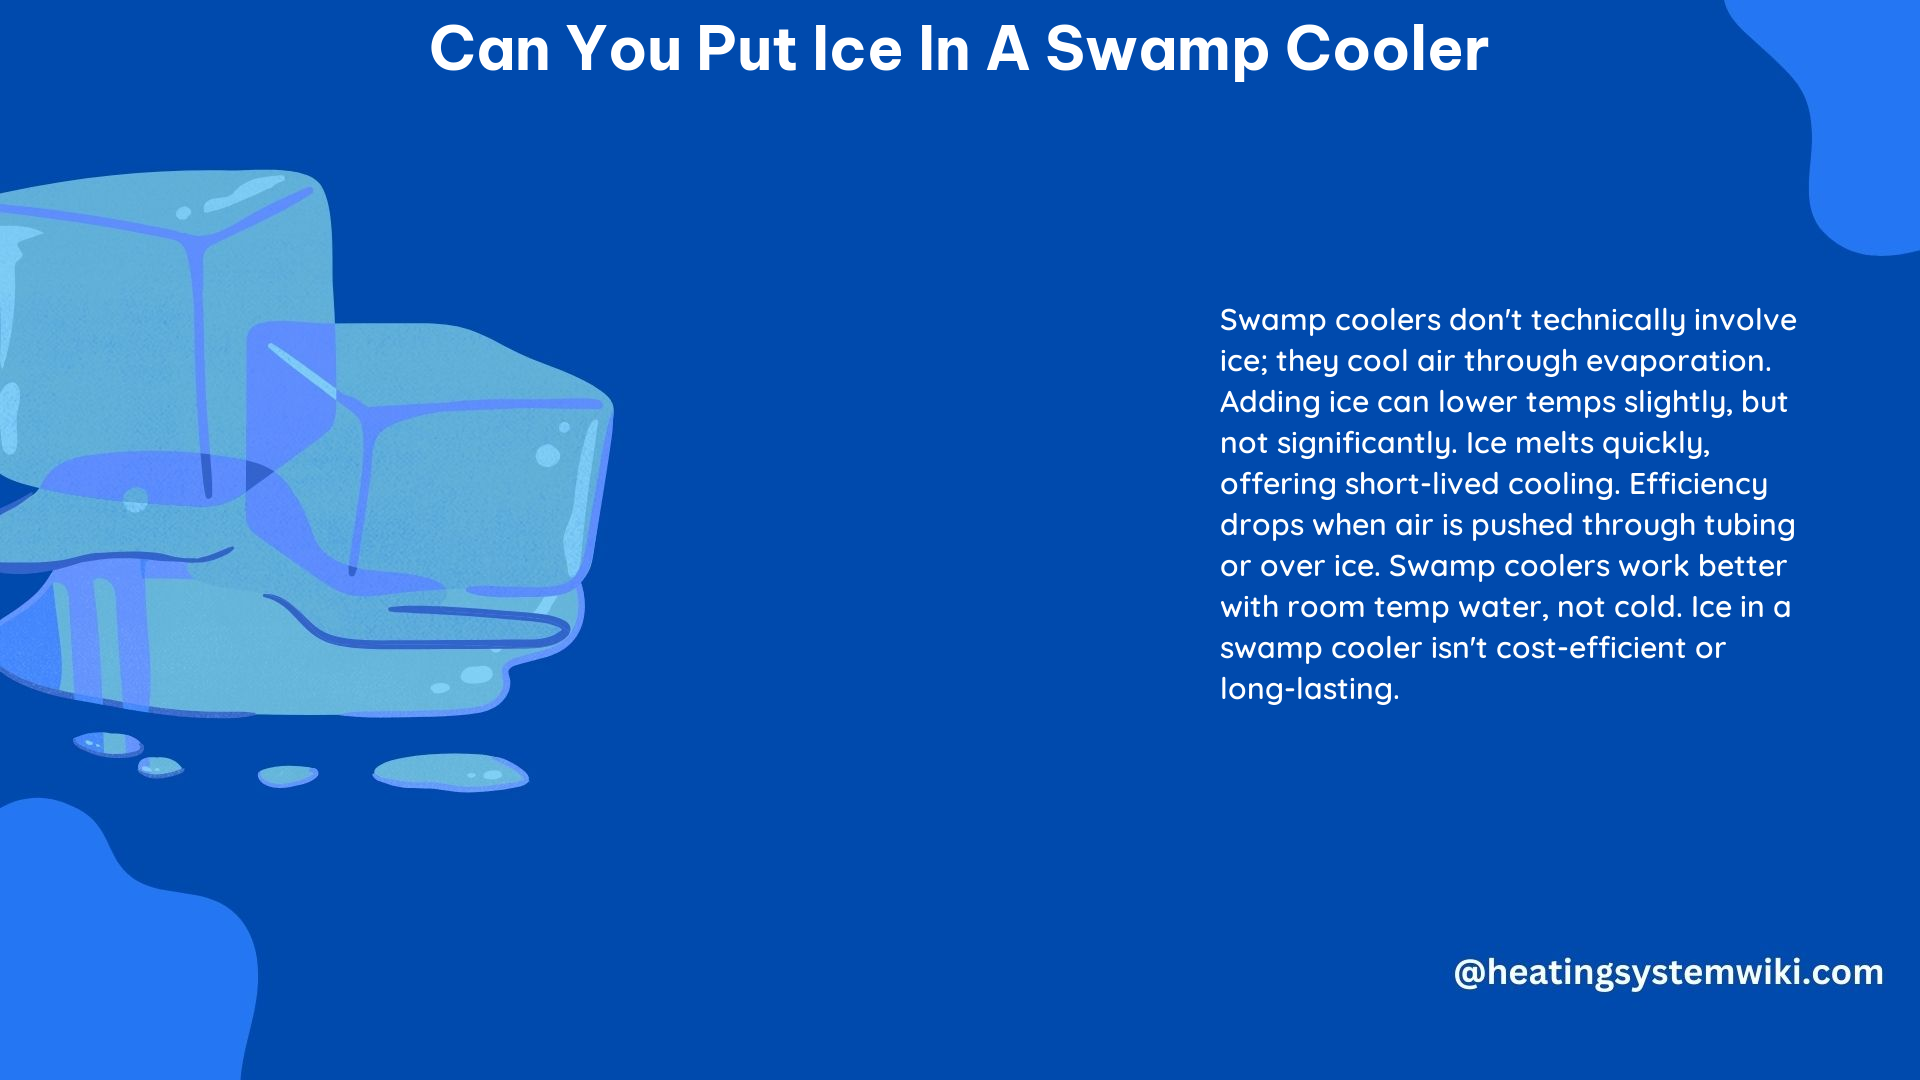 Can You Put Ice in a Swamp Cooler